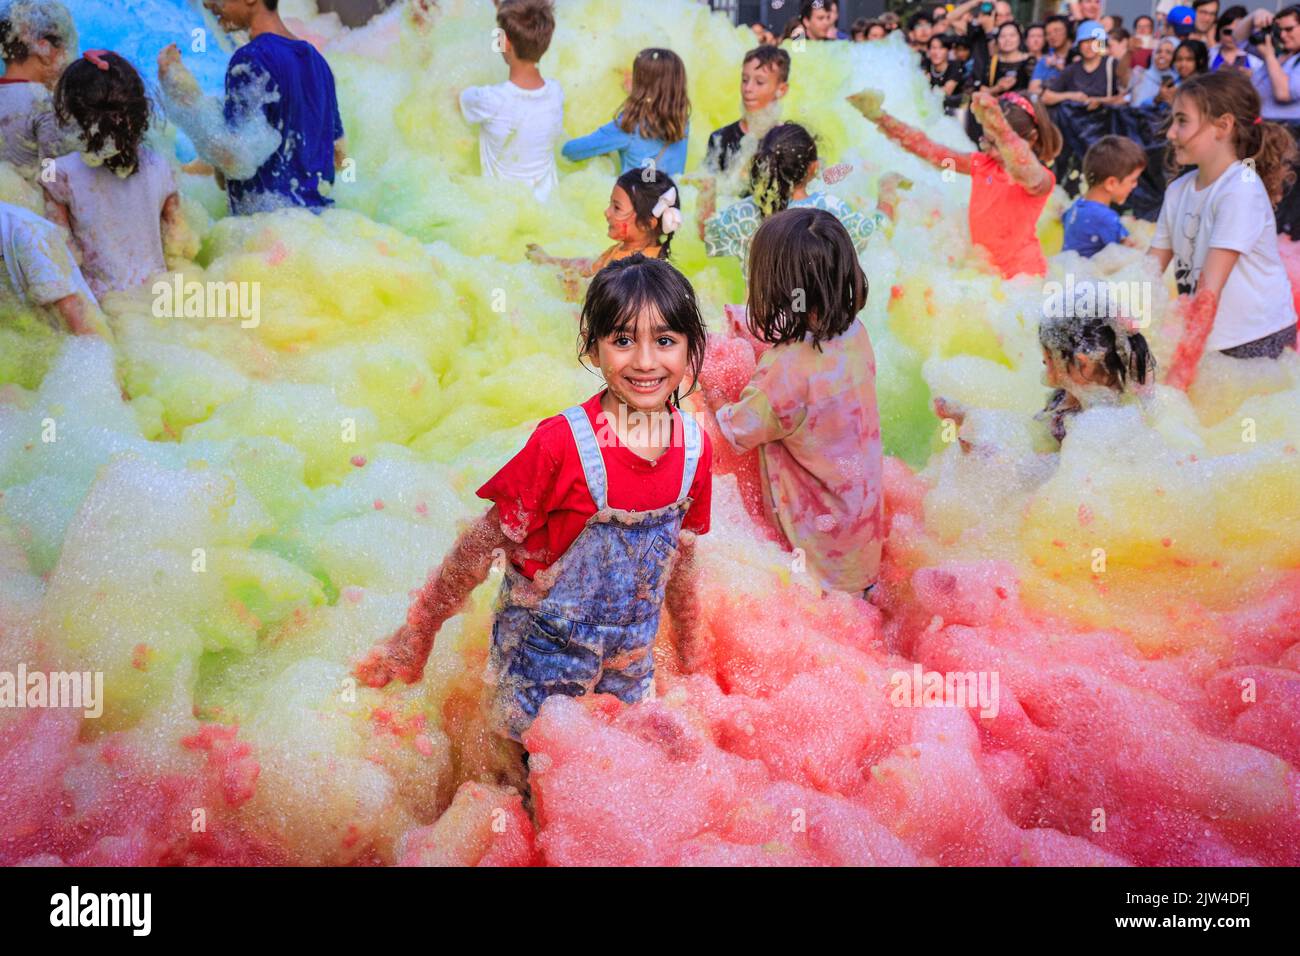 London, UK. 03rd Aug, 2022. Zahara, who is visiting the installation with her dad, loves jumping around in the foam. People interact with 'Island of Foam: Version XVIII', a colourful, constantly changing foam installation. The installation is a UK premiere from German artist Stephanie Lüning (who is operating the 'foam cannon' at the top of the stairs), transforming Greenwich Peninsula with mountains of rainbow coloured foam. Credit: Imageplotter/Alamy Live News Stock Photo